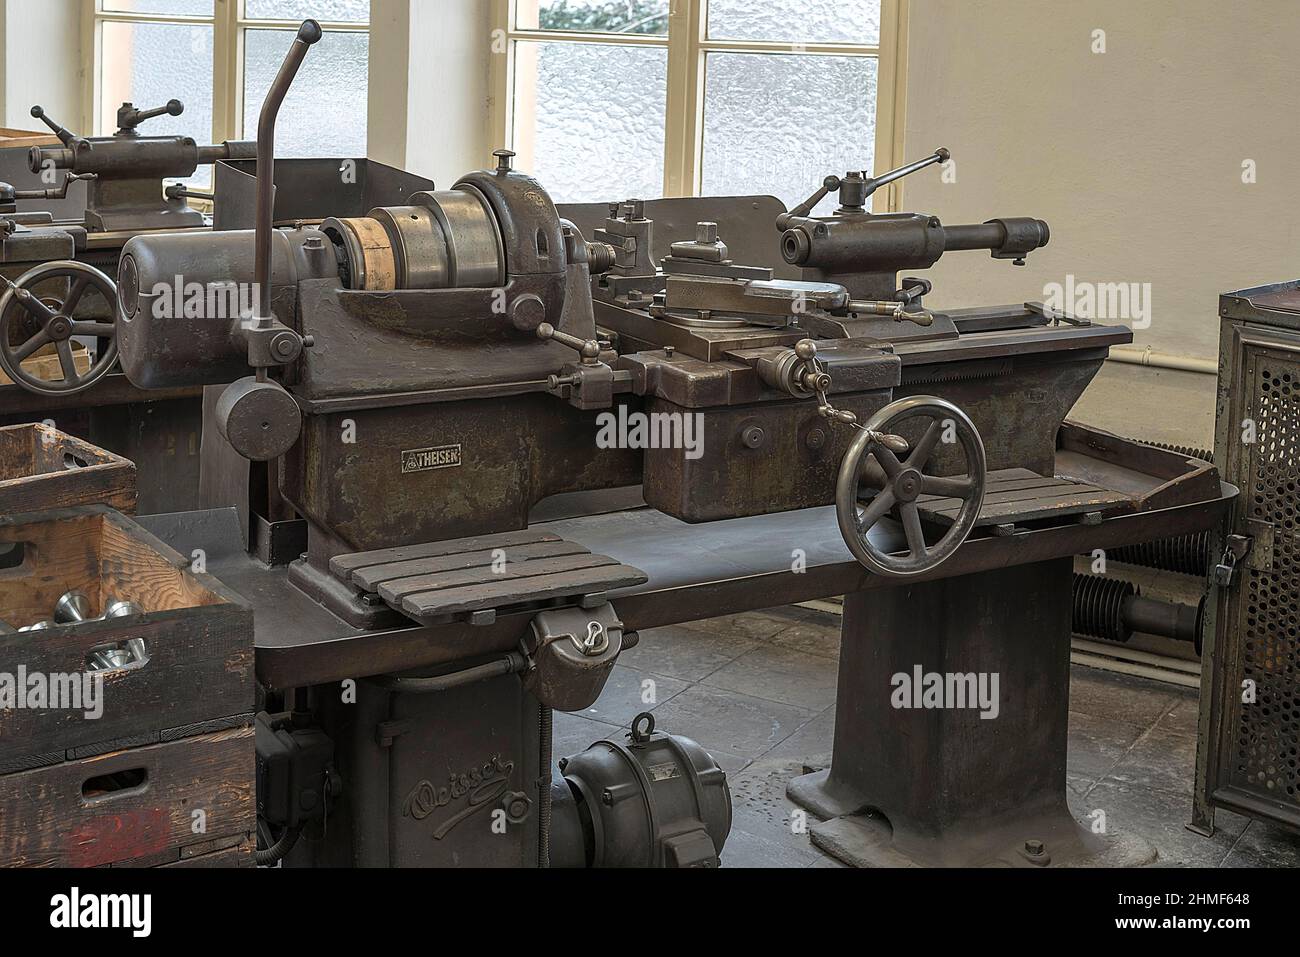 Lathe in a historic valve factory, now an industrial museum, Lauf an der Pegnitz, Middle Franconia, Bavaria, Germany Stock Photo